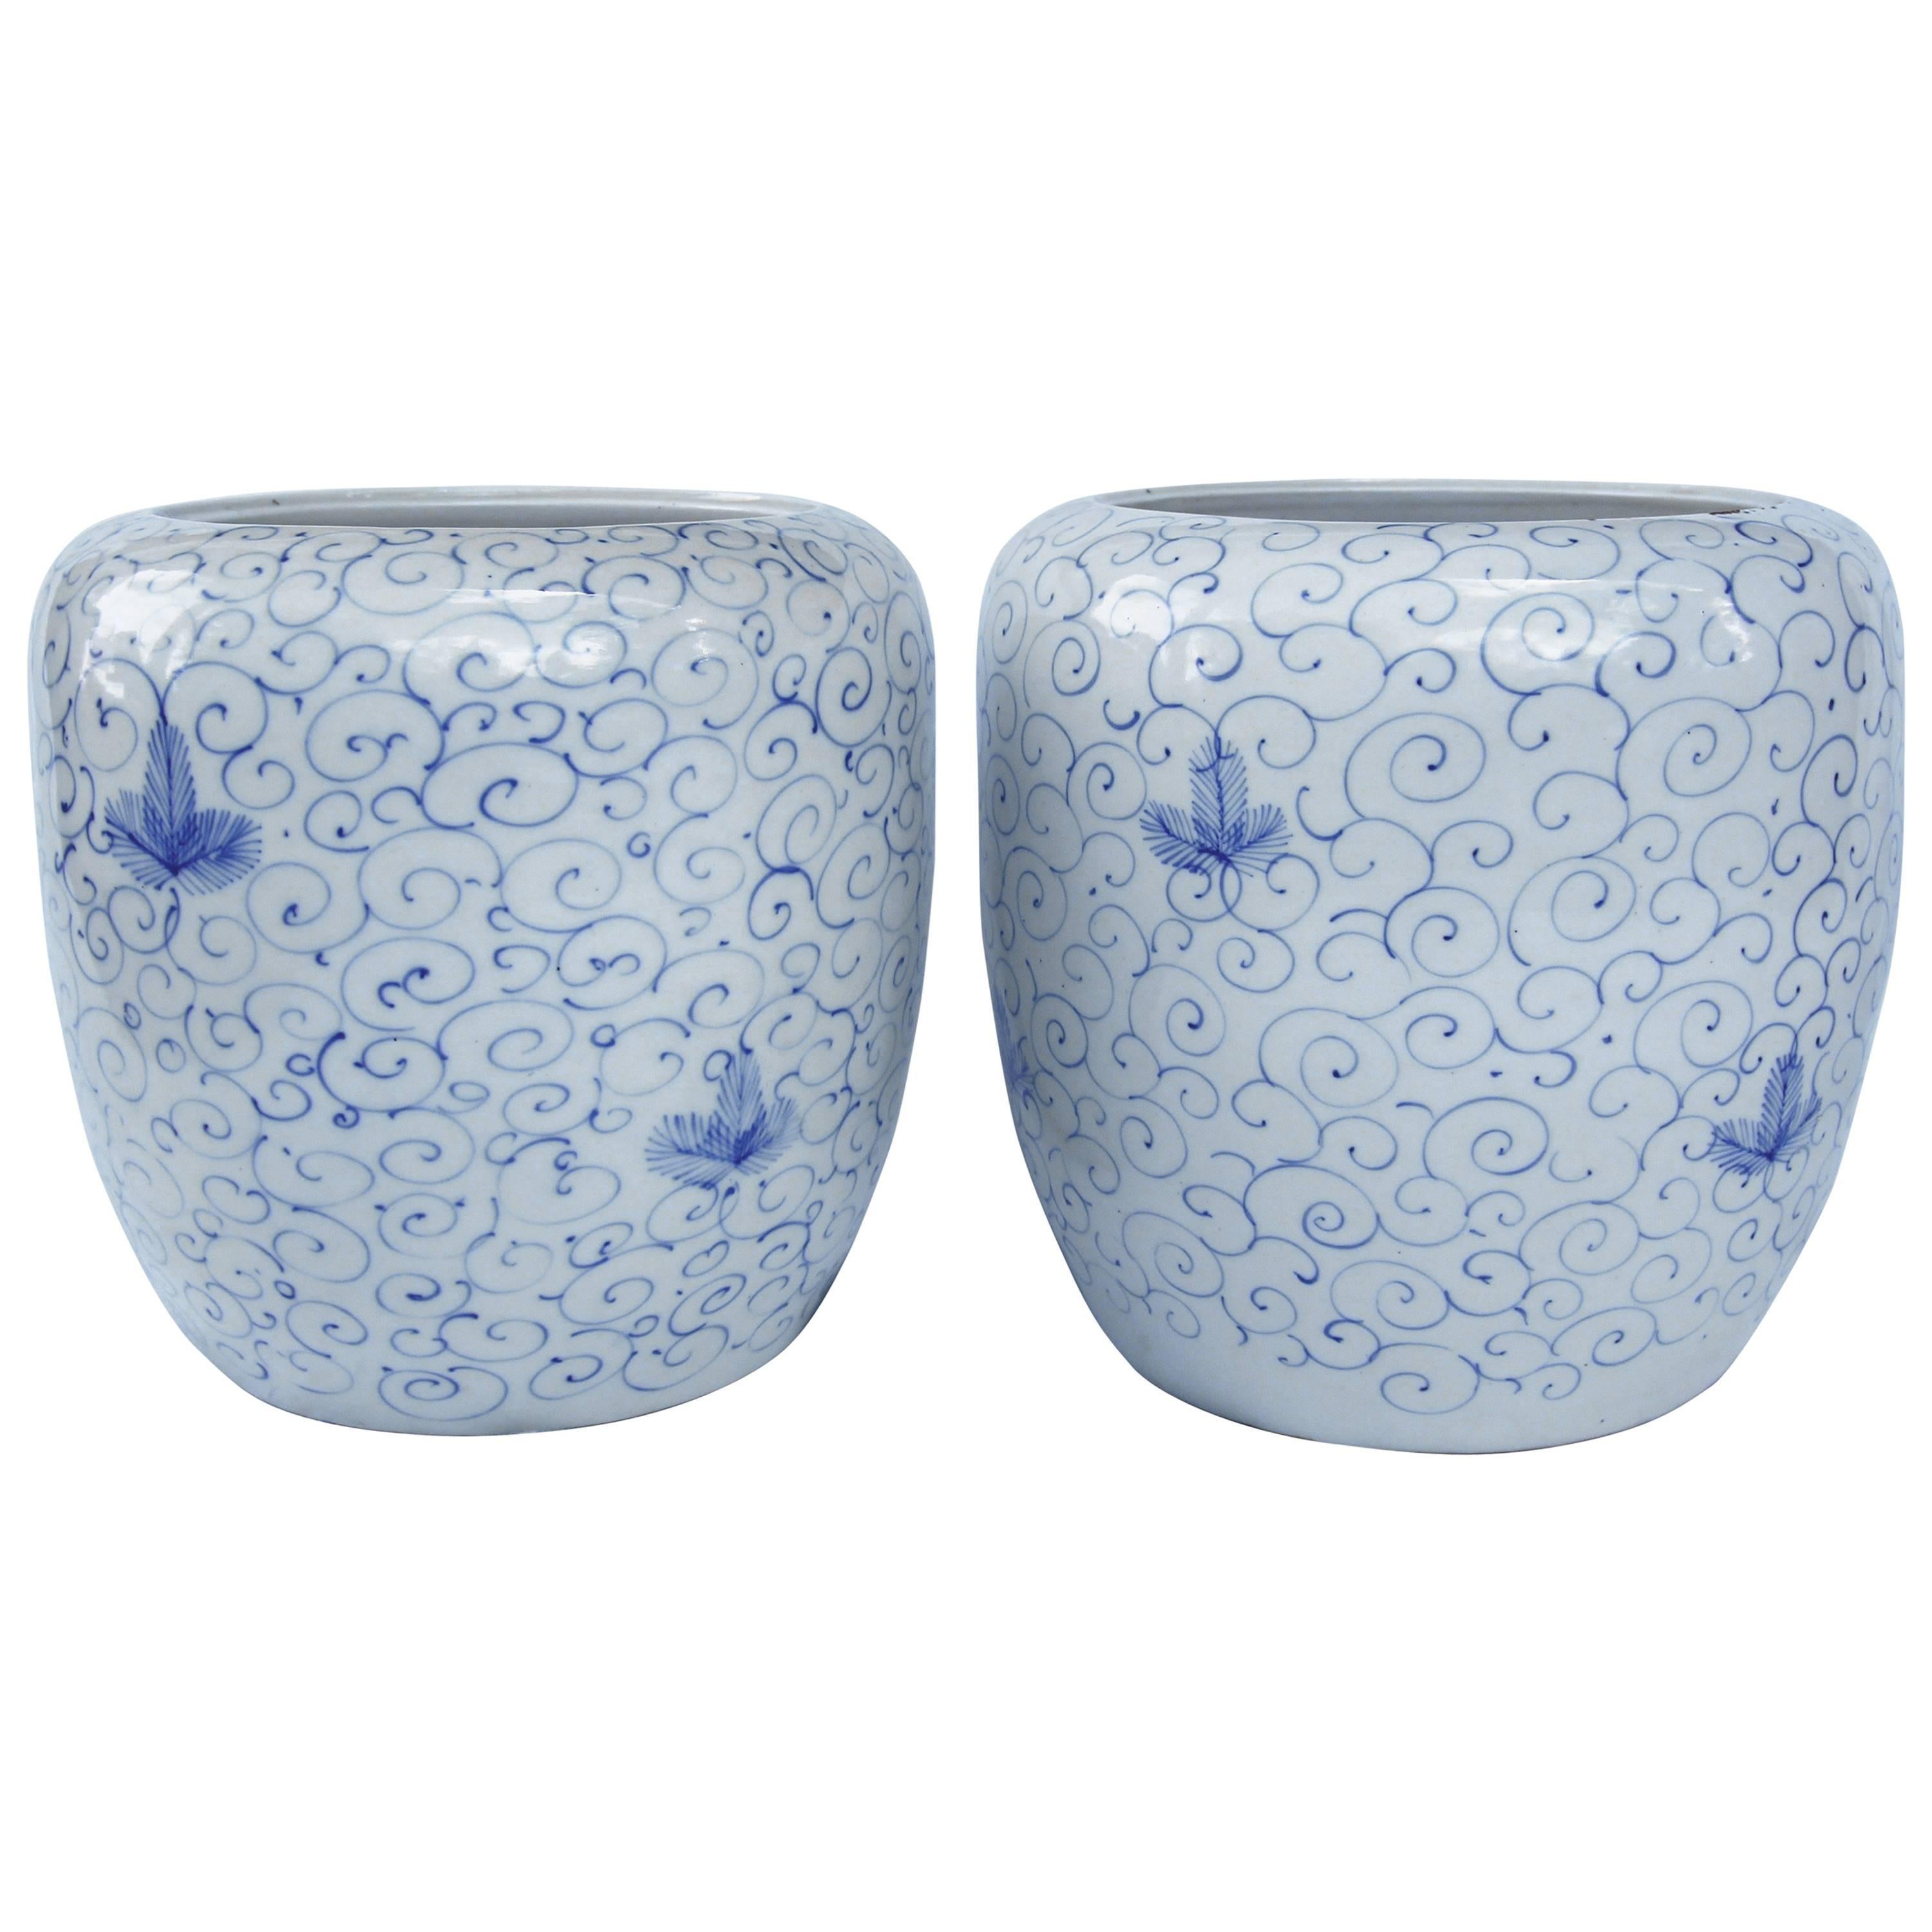 Pair of Chinese Blue and White Ceramic Planters